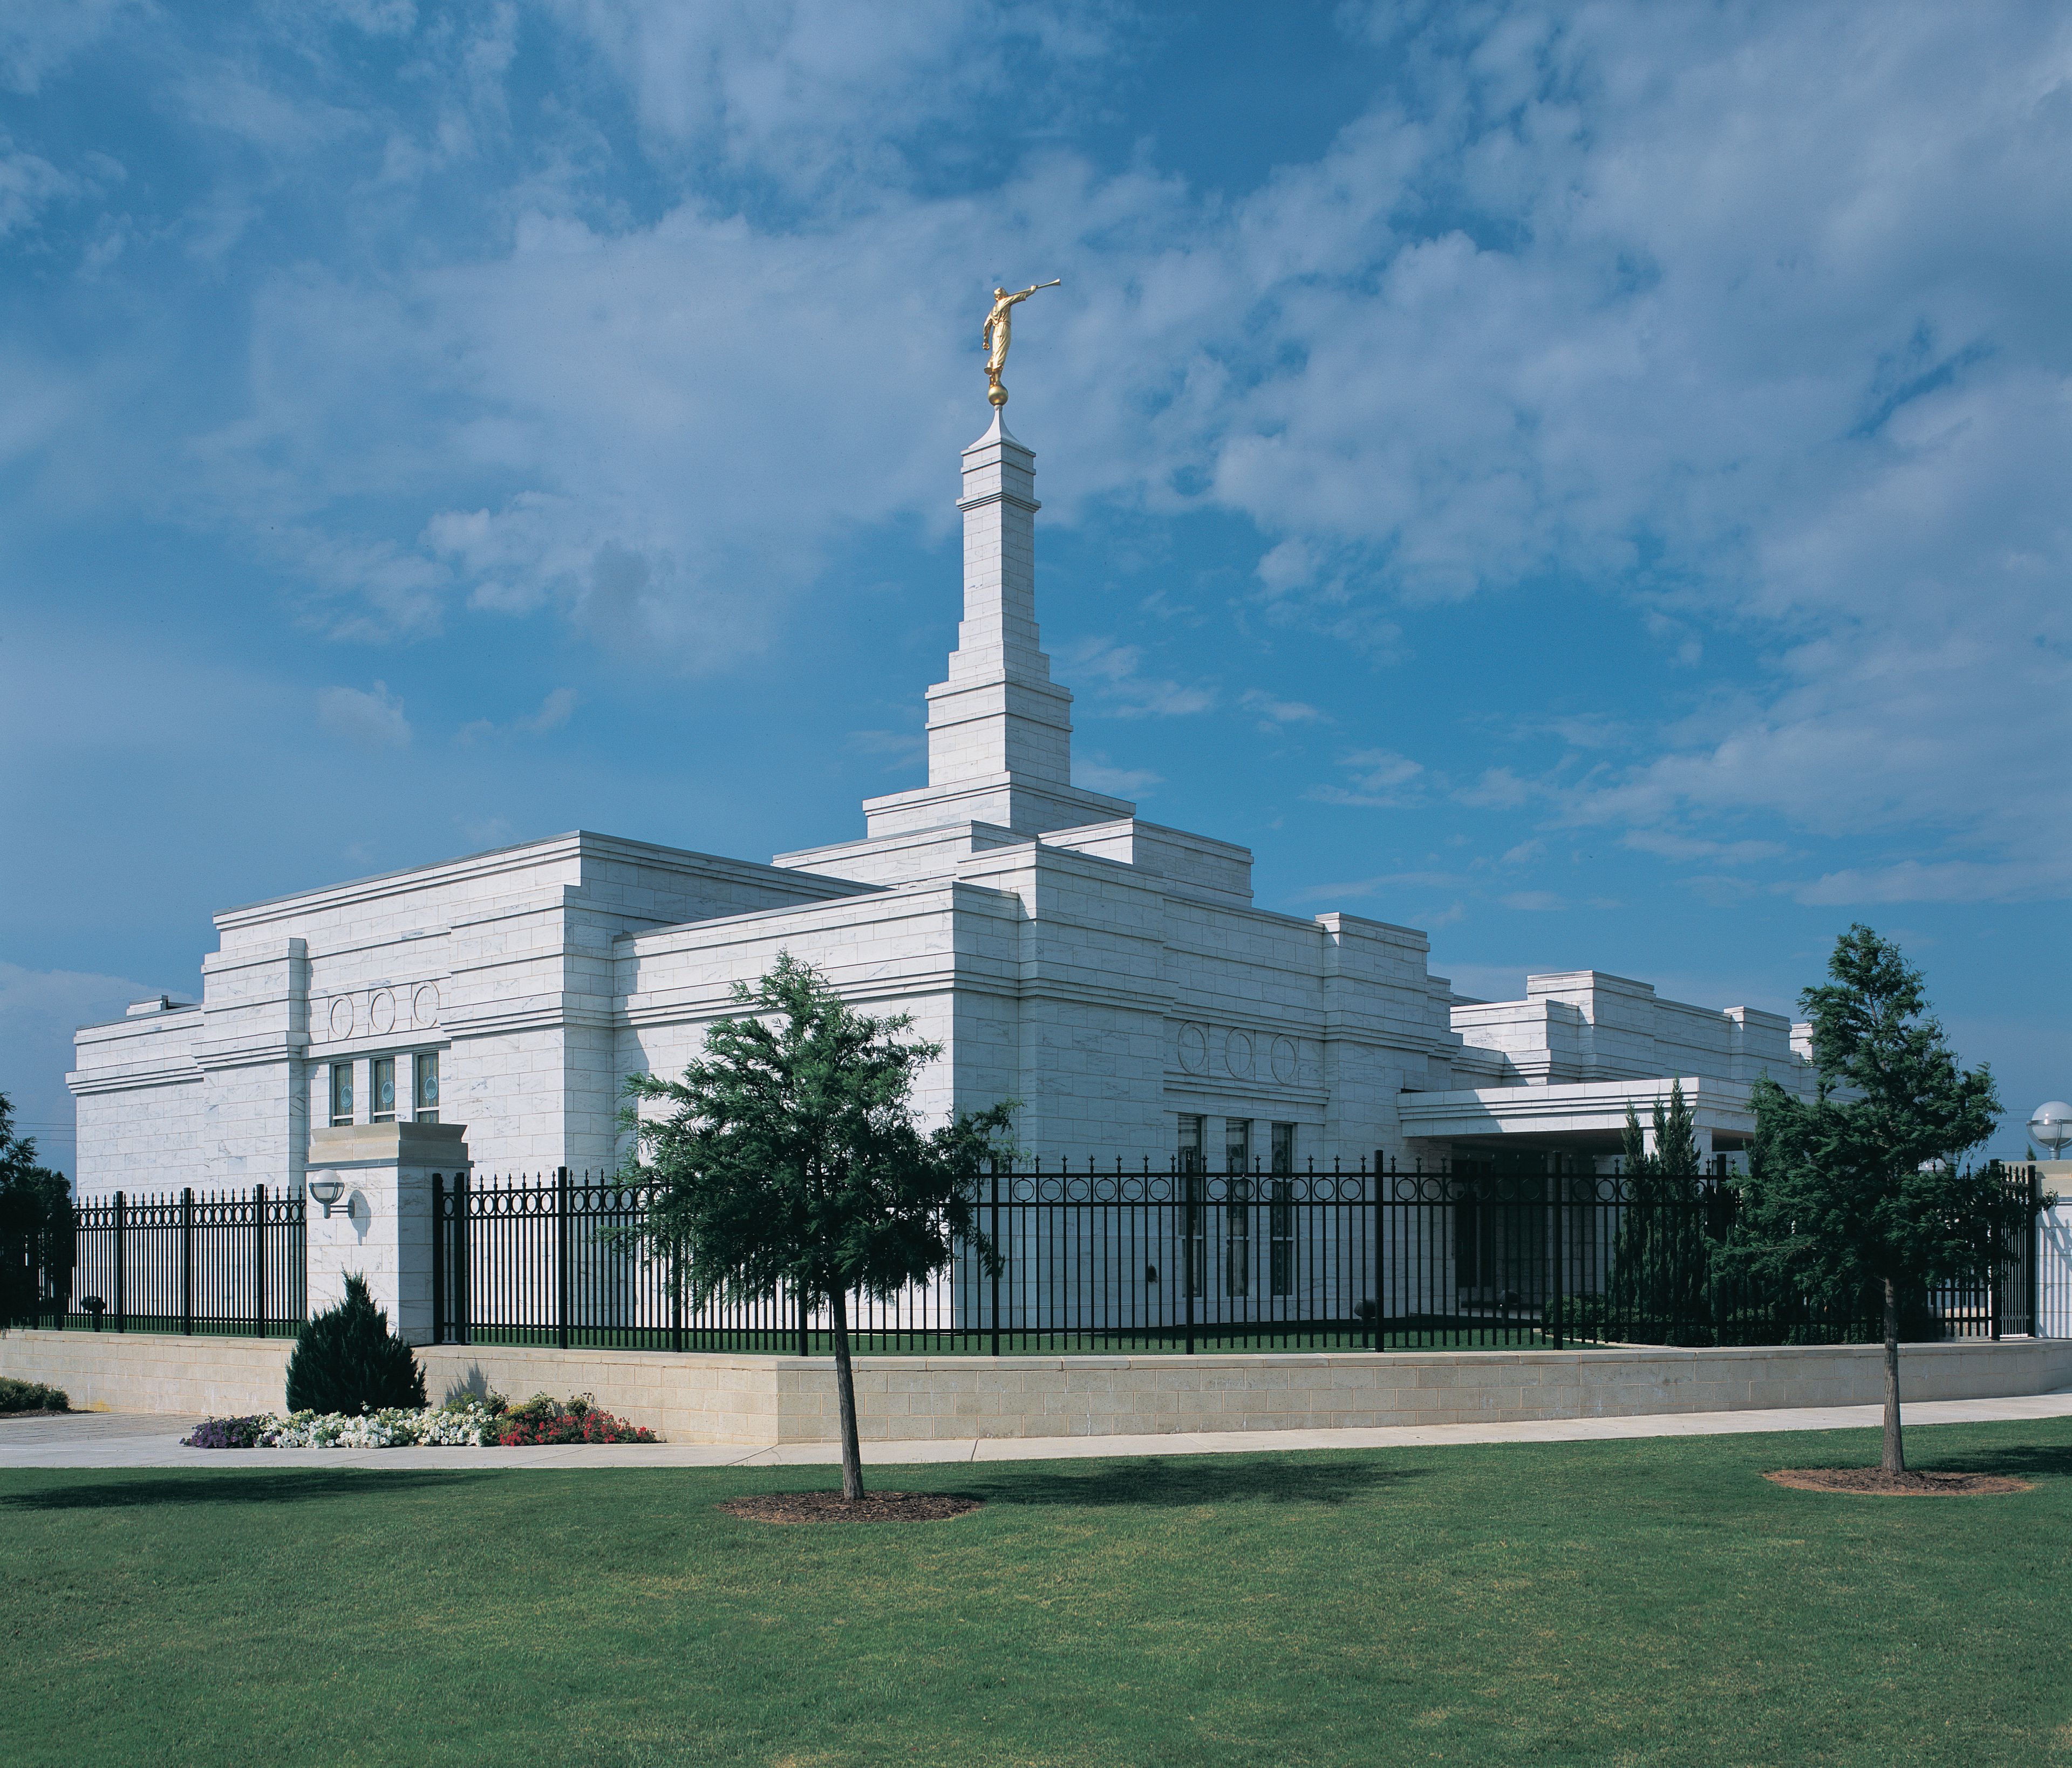 A side view of the Oklahoma City Oklahoma Temple, including scenery.